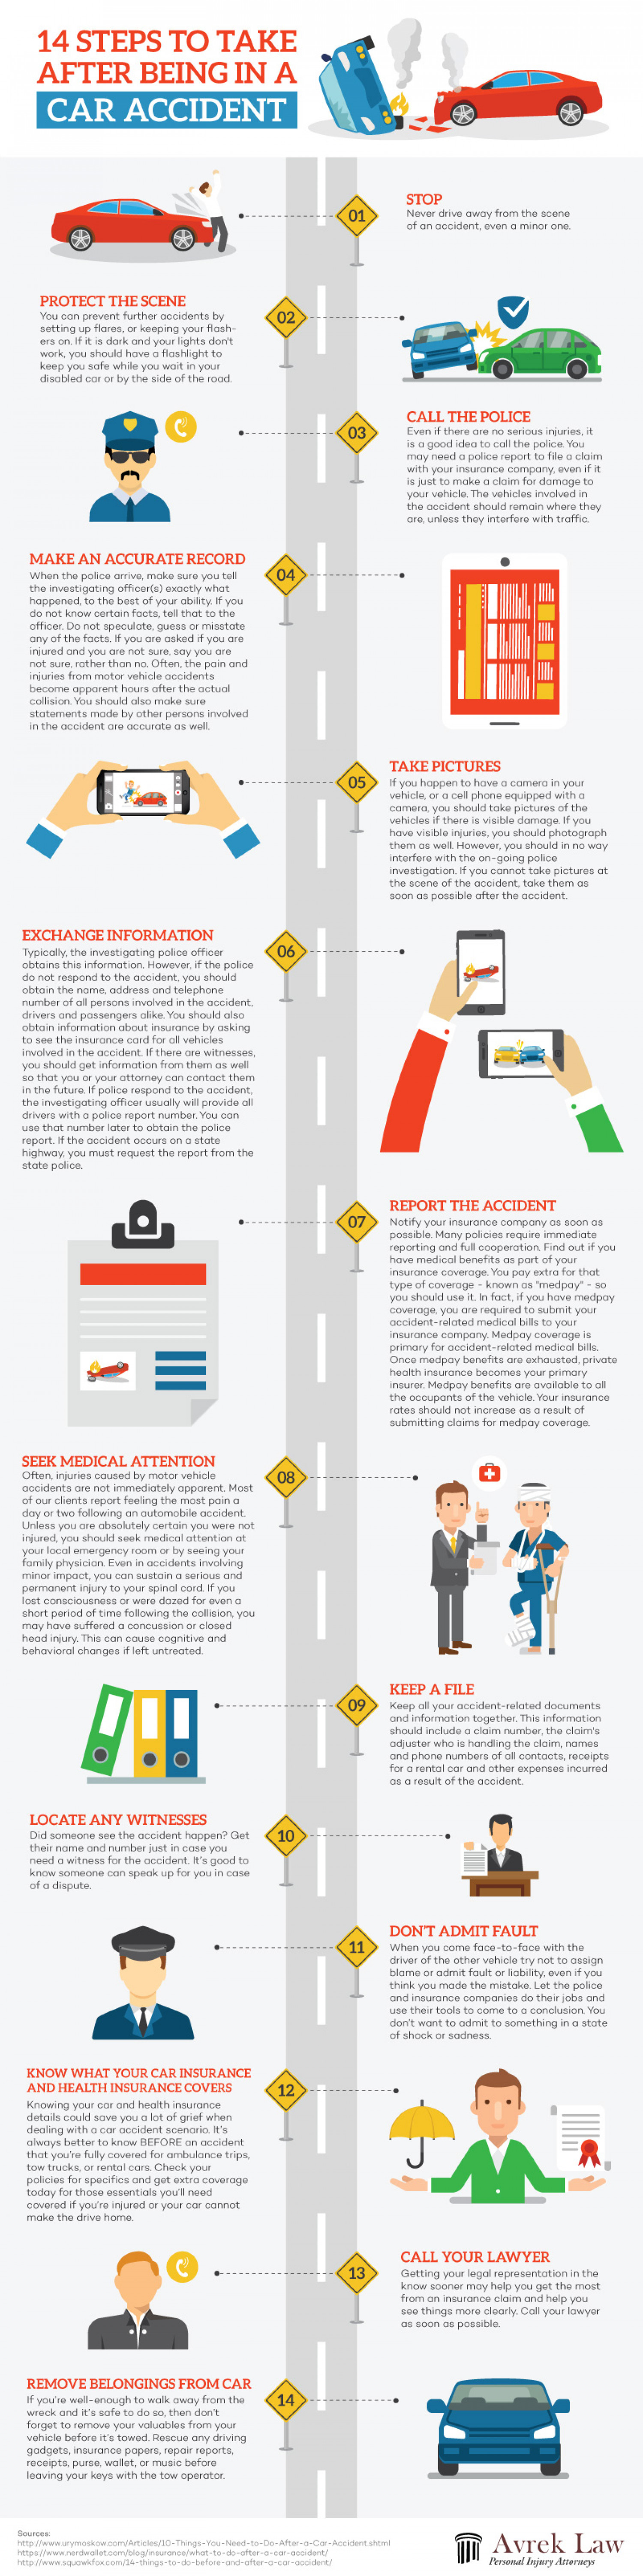 14 Steps to Take After a Car Accident Infographic